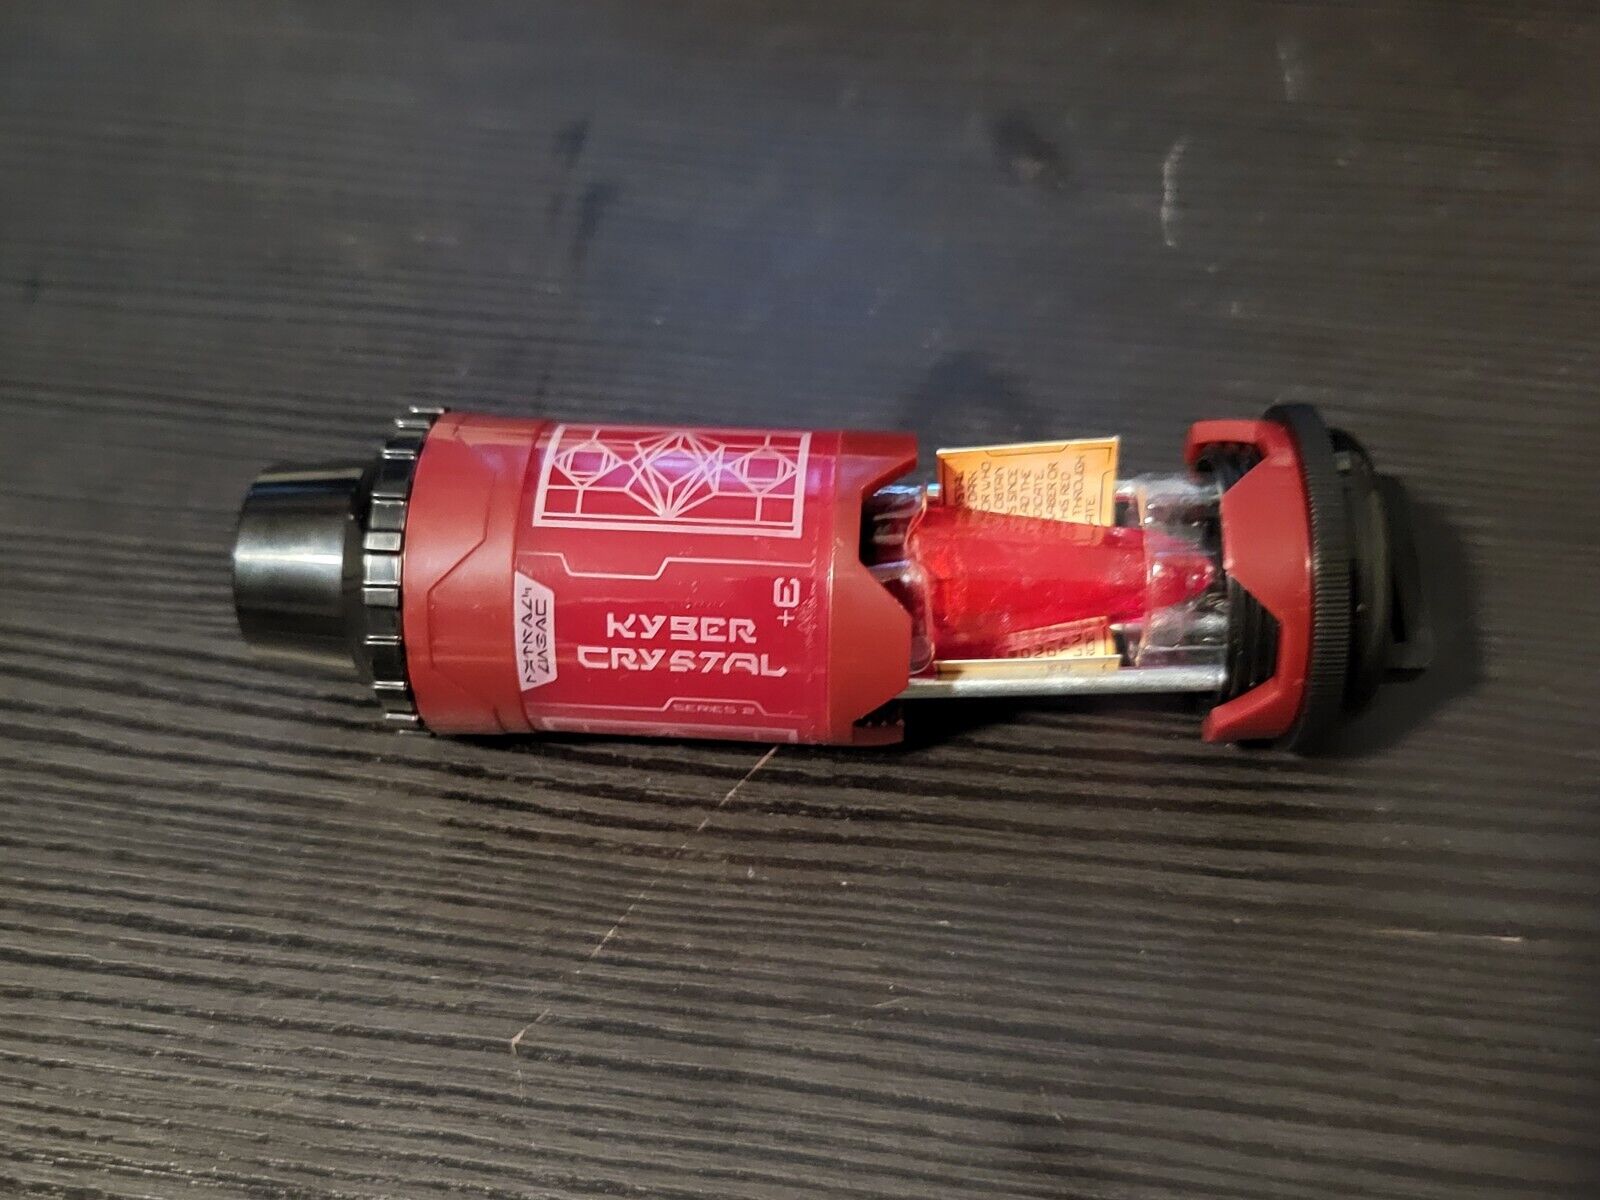 New Series 2 Star Wars Galaxy's Edge Kyber Crystal Red Opened